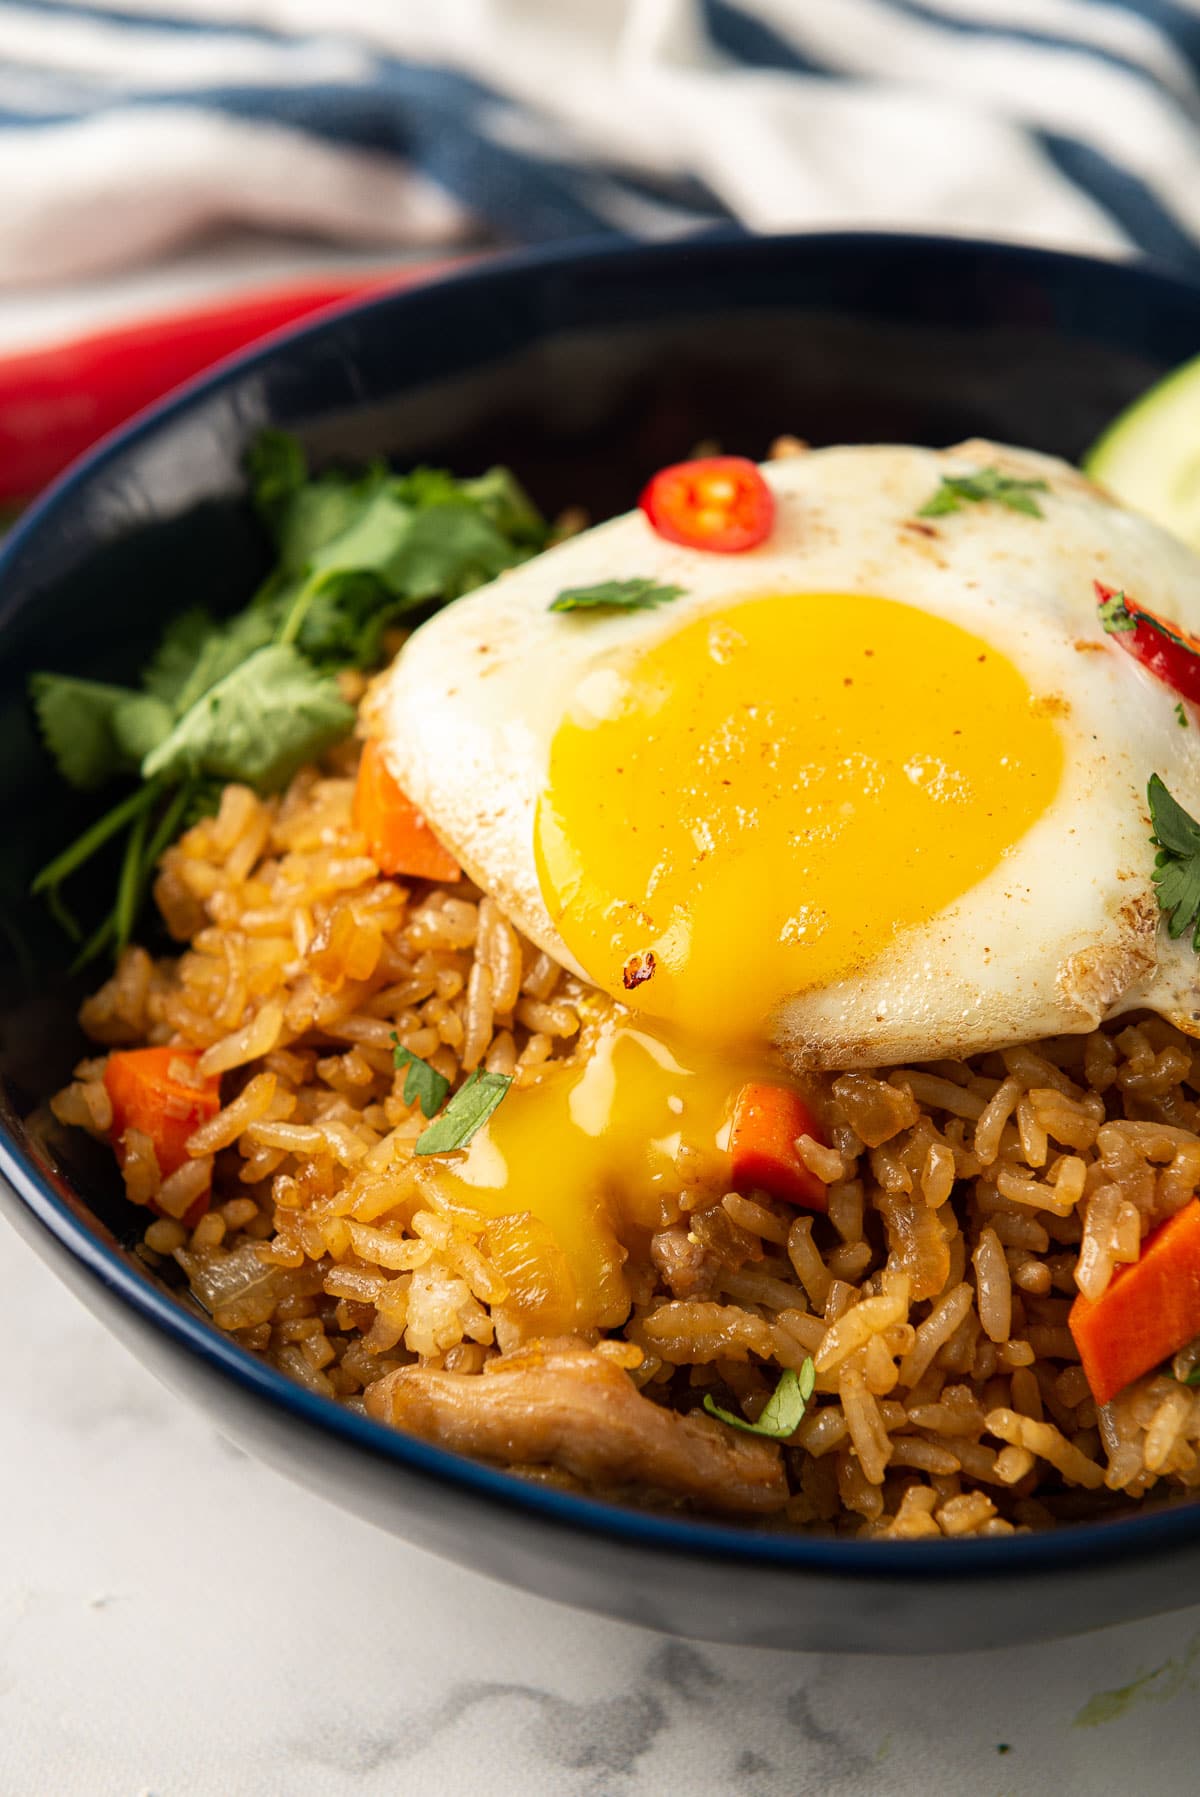 Indonesian fried rice with a fried egg on top - the yolk has been popped and is oozing into the rice.